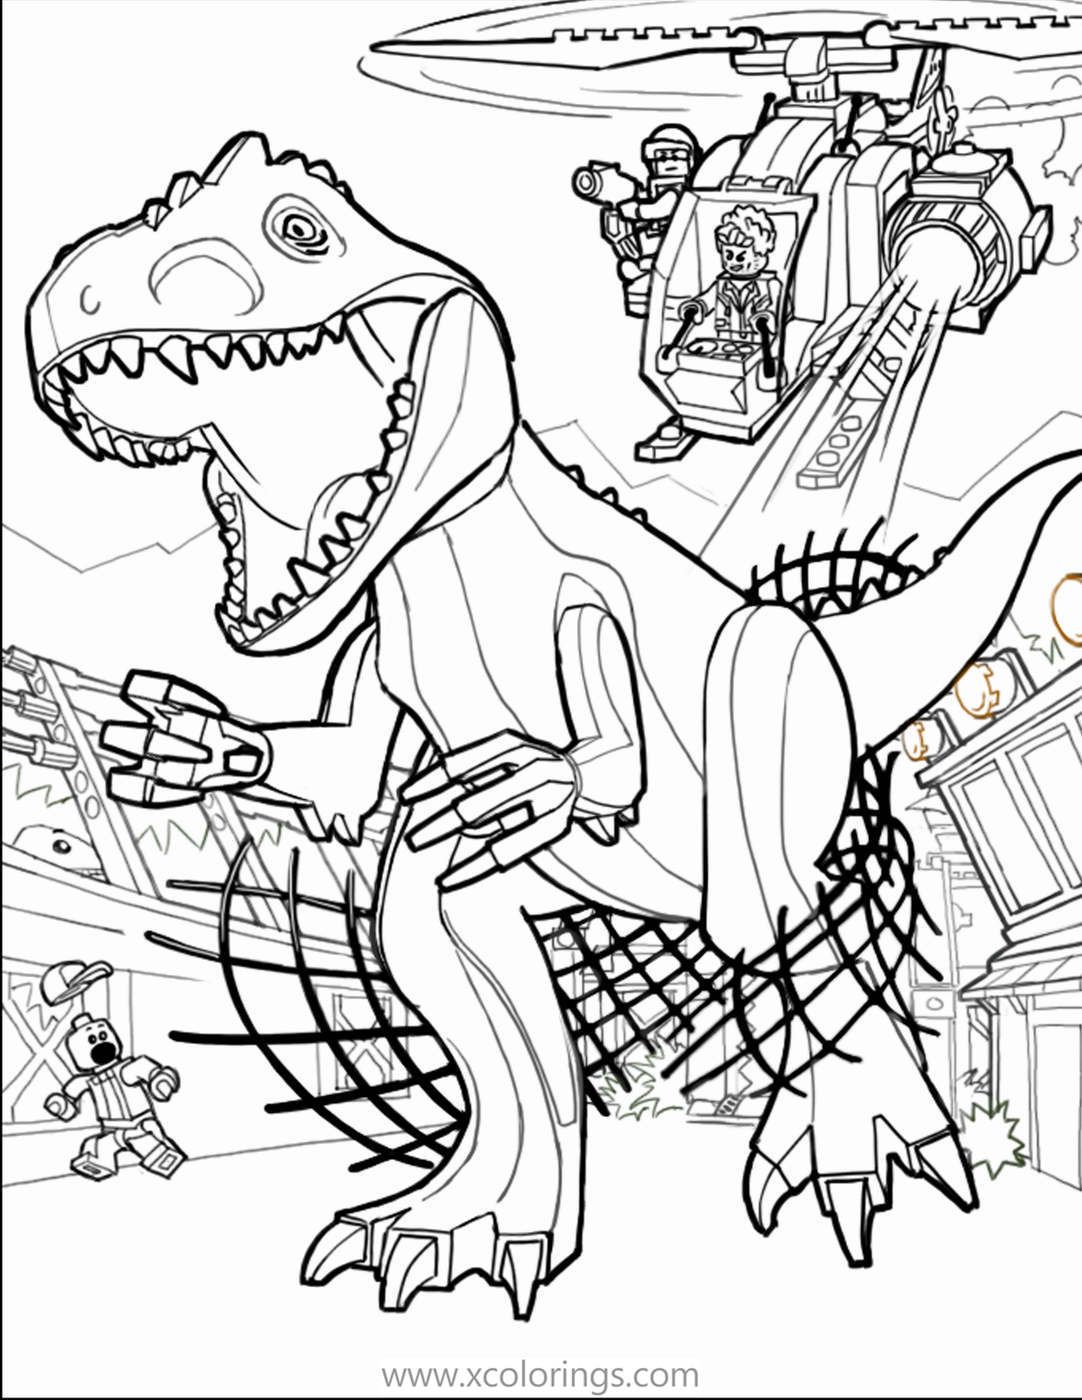 LEGO Jurassic World Coloring Pages T-Rex is Running - XColorings.com